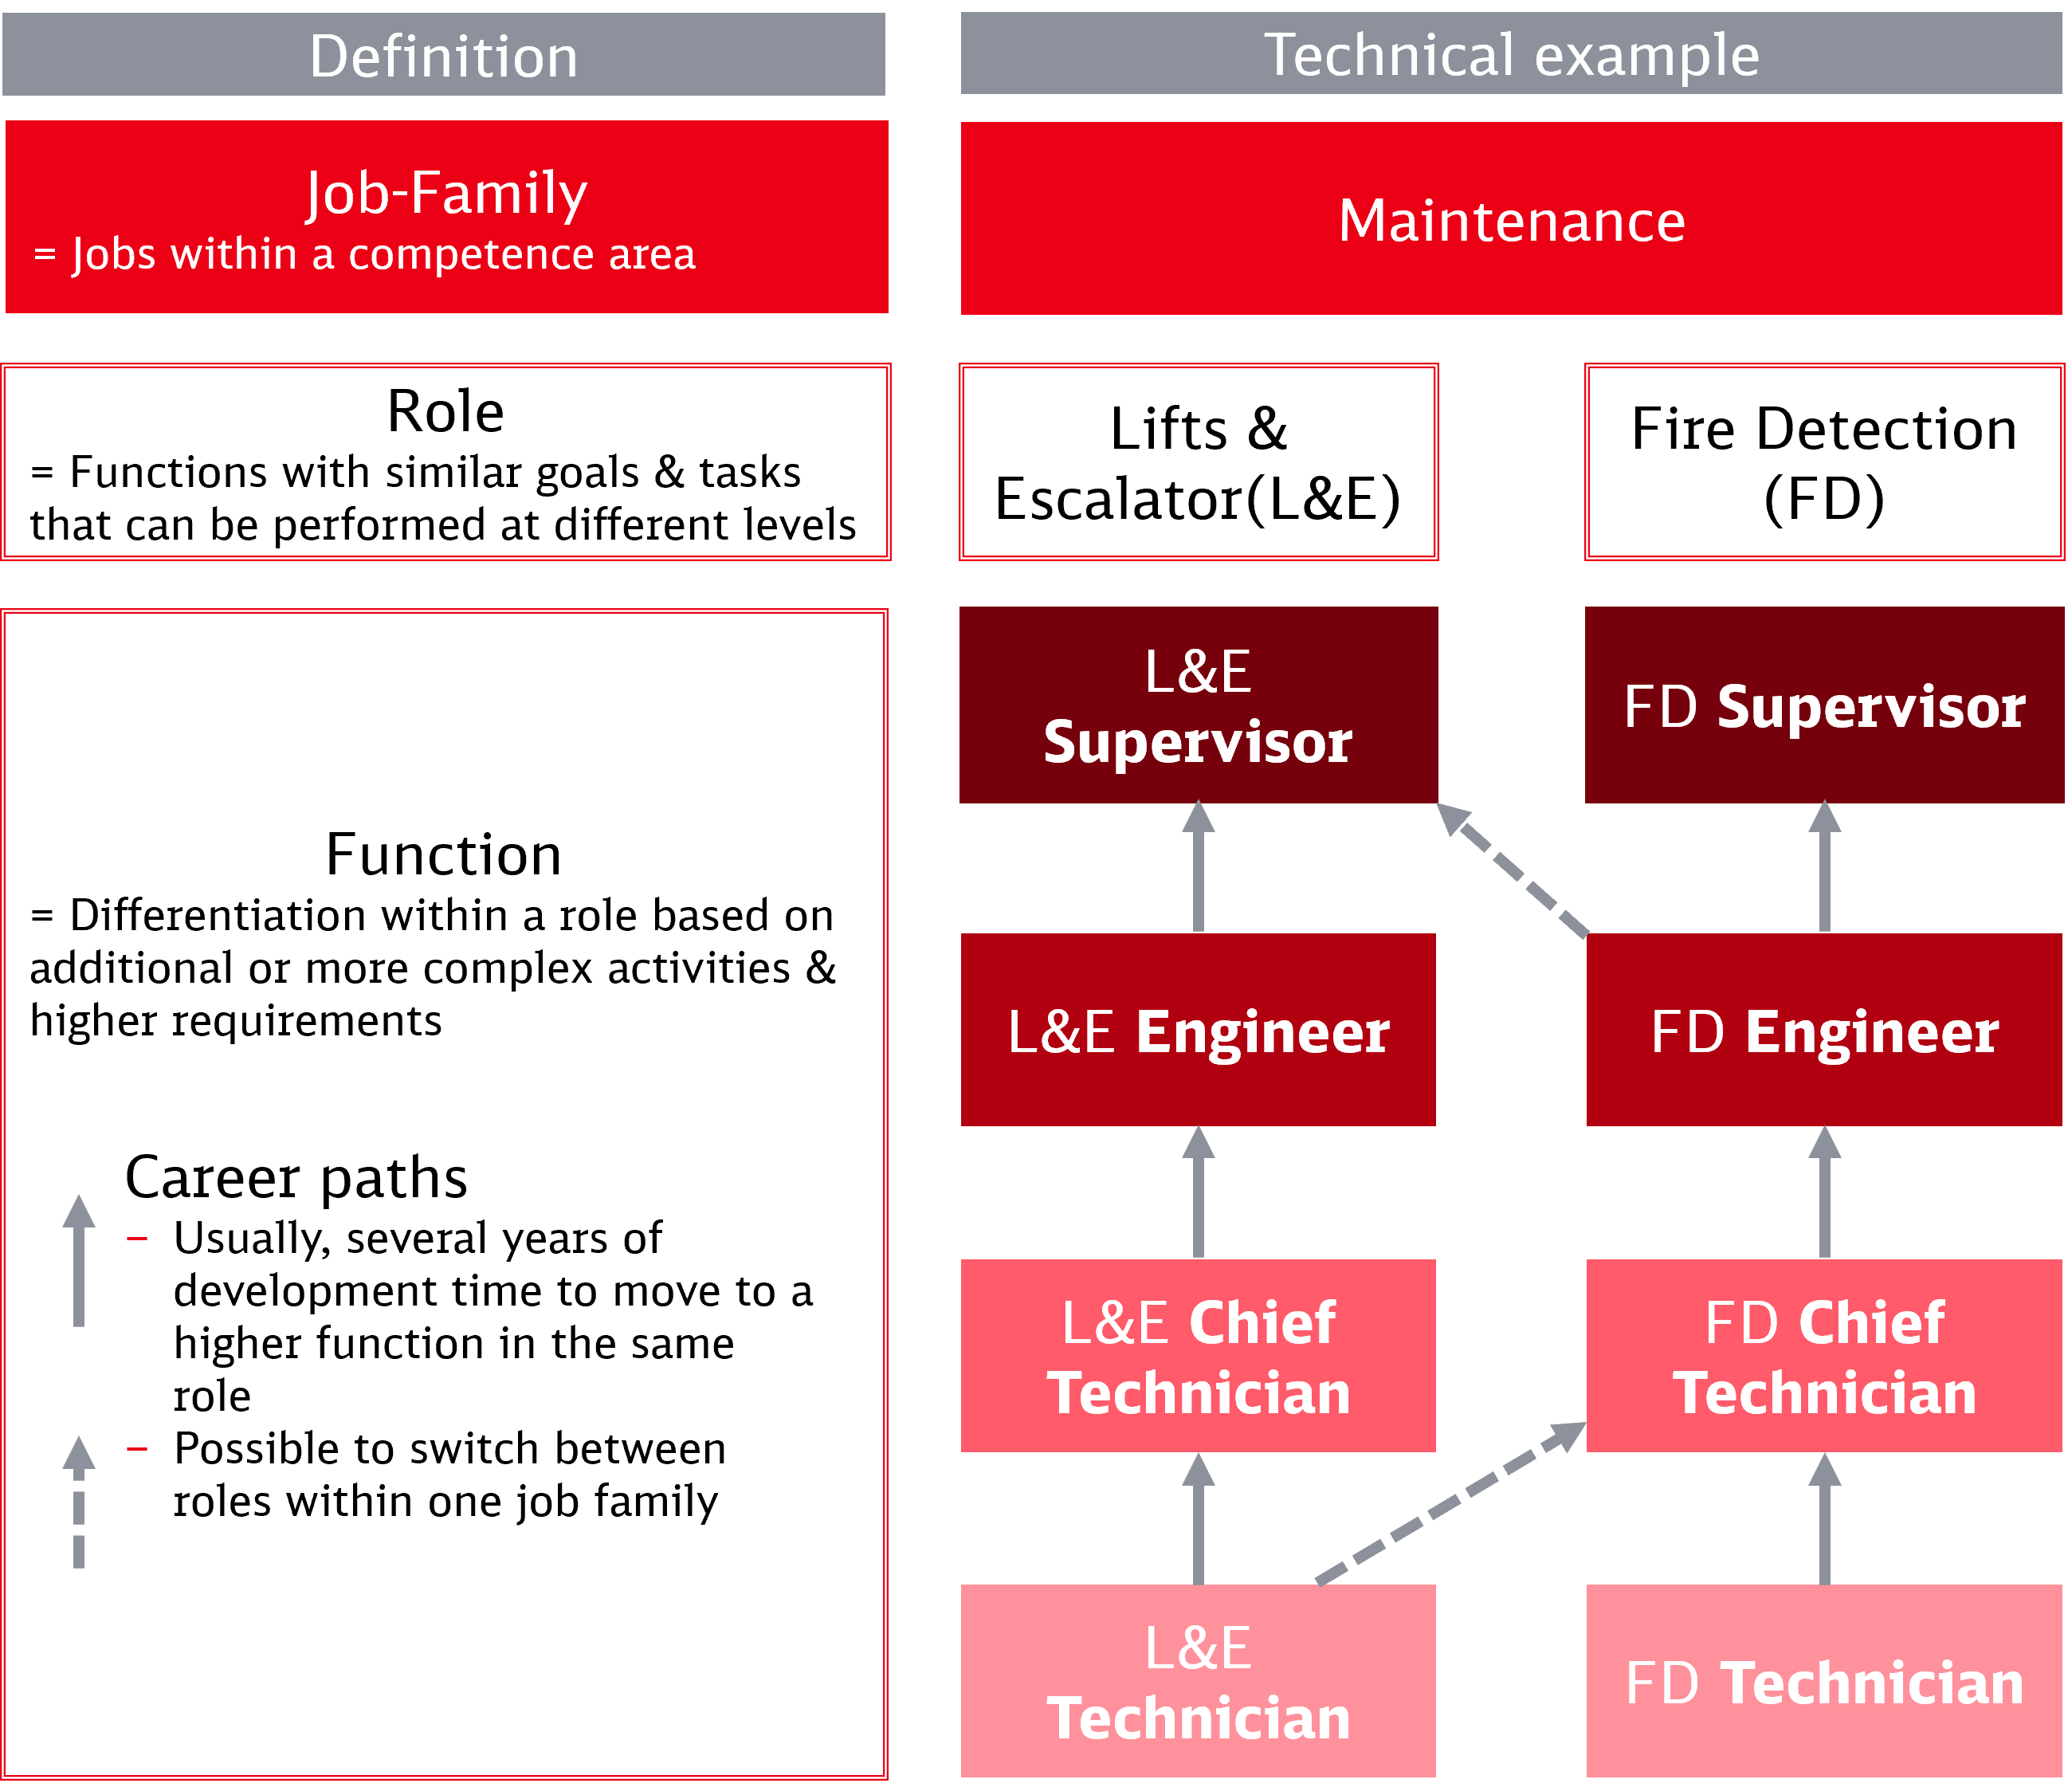 Example for career paths in a technical job family